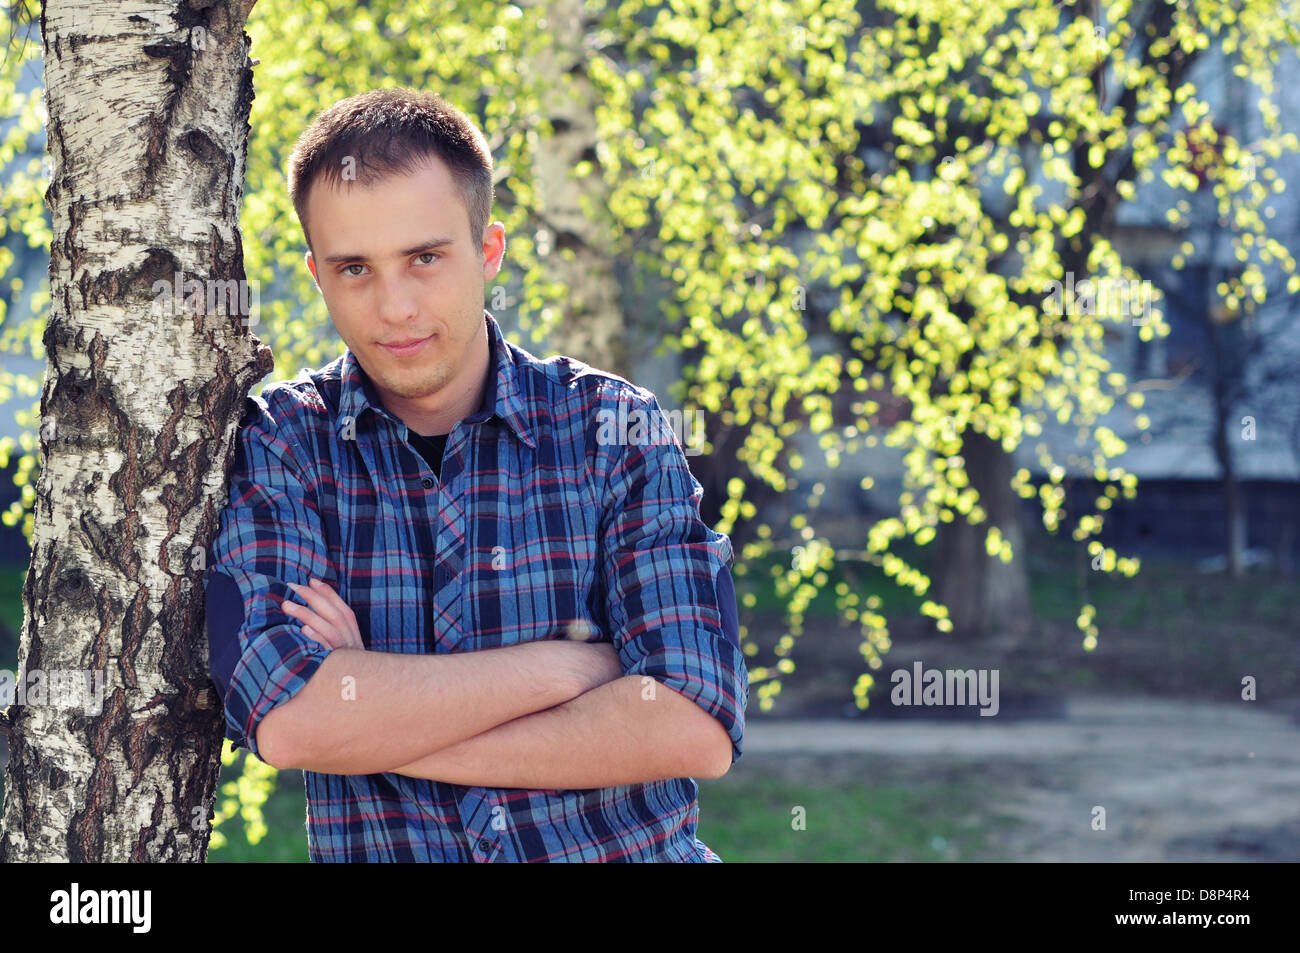 Outdoor portrait of young handsome man in summer park Stock Photo